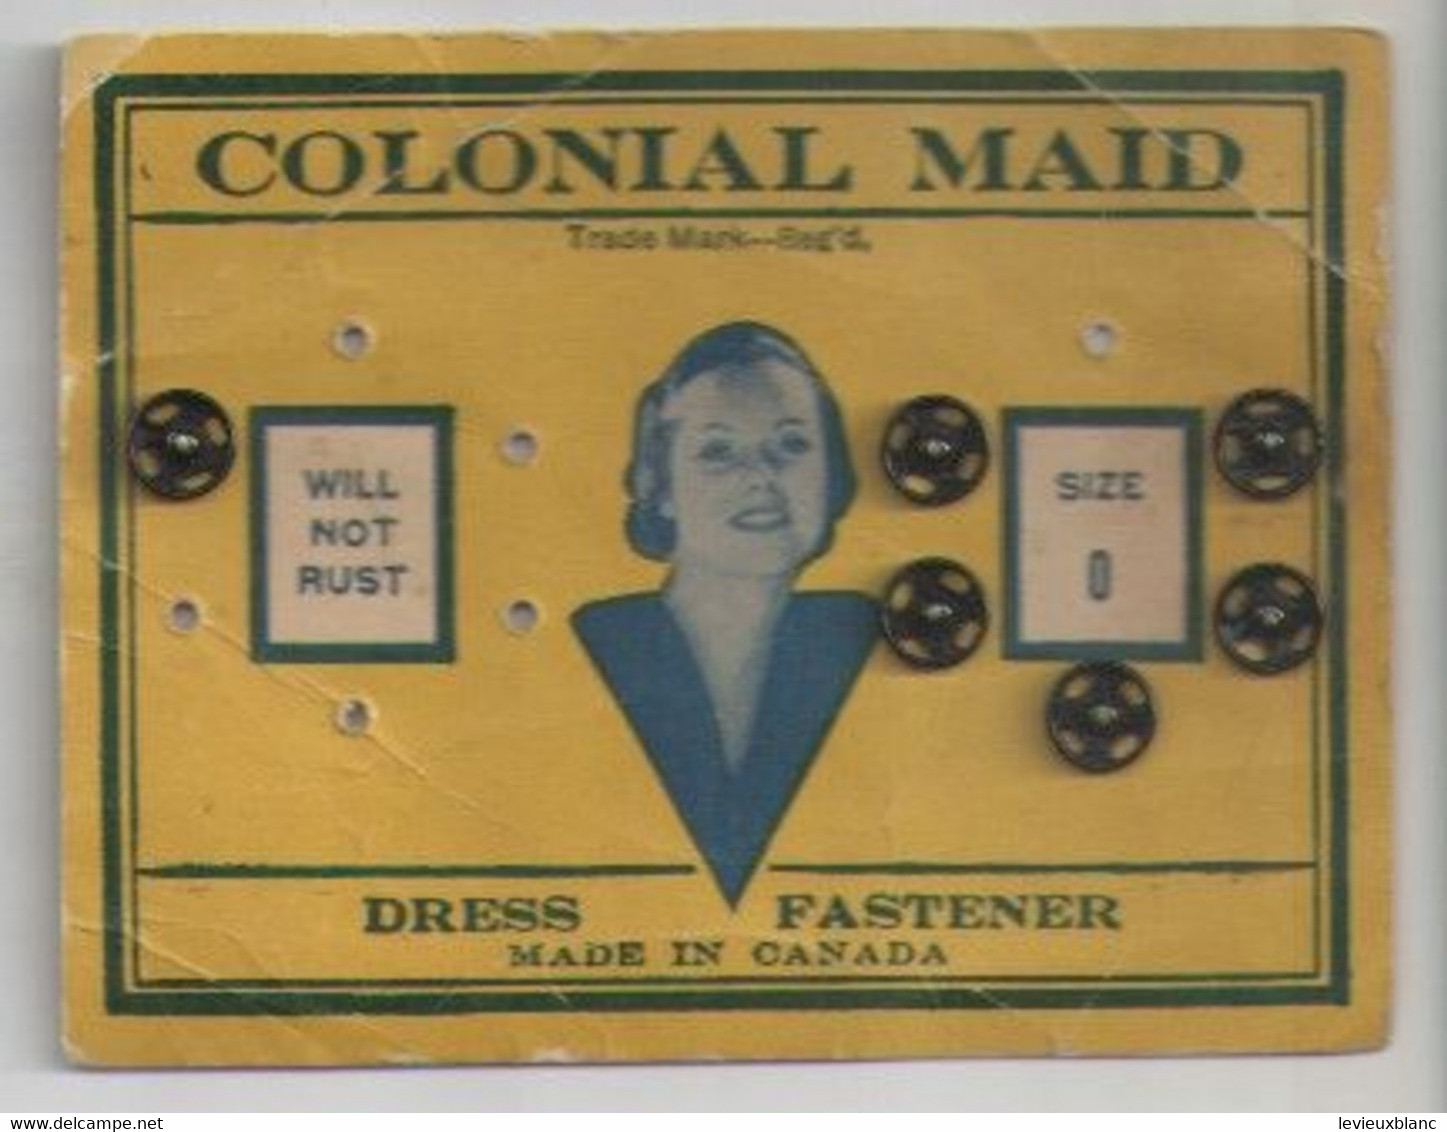 Mercerie / Boutons Pressions/Colonial Maid /Dress Fastener/Made In Canada /Carton De Présentation/Vers 1950-60     MER87 - Knopen